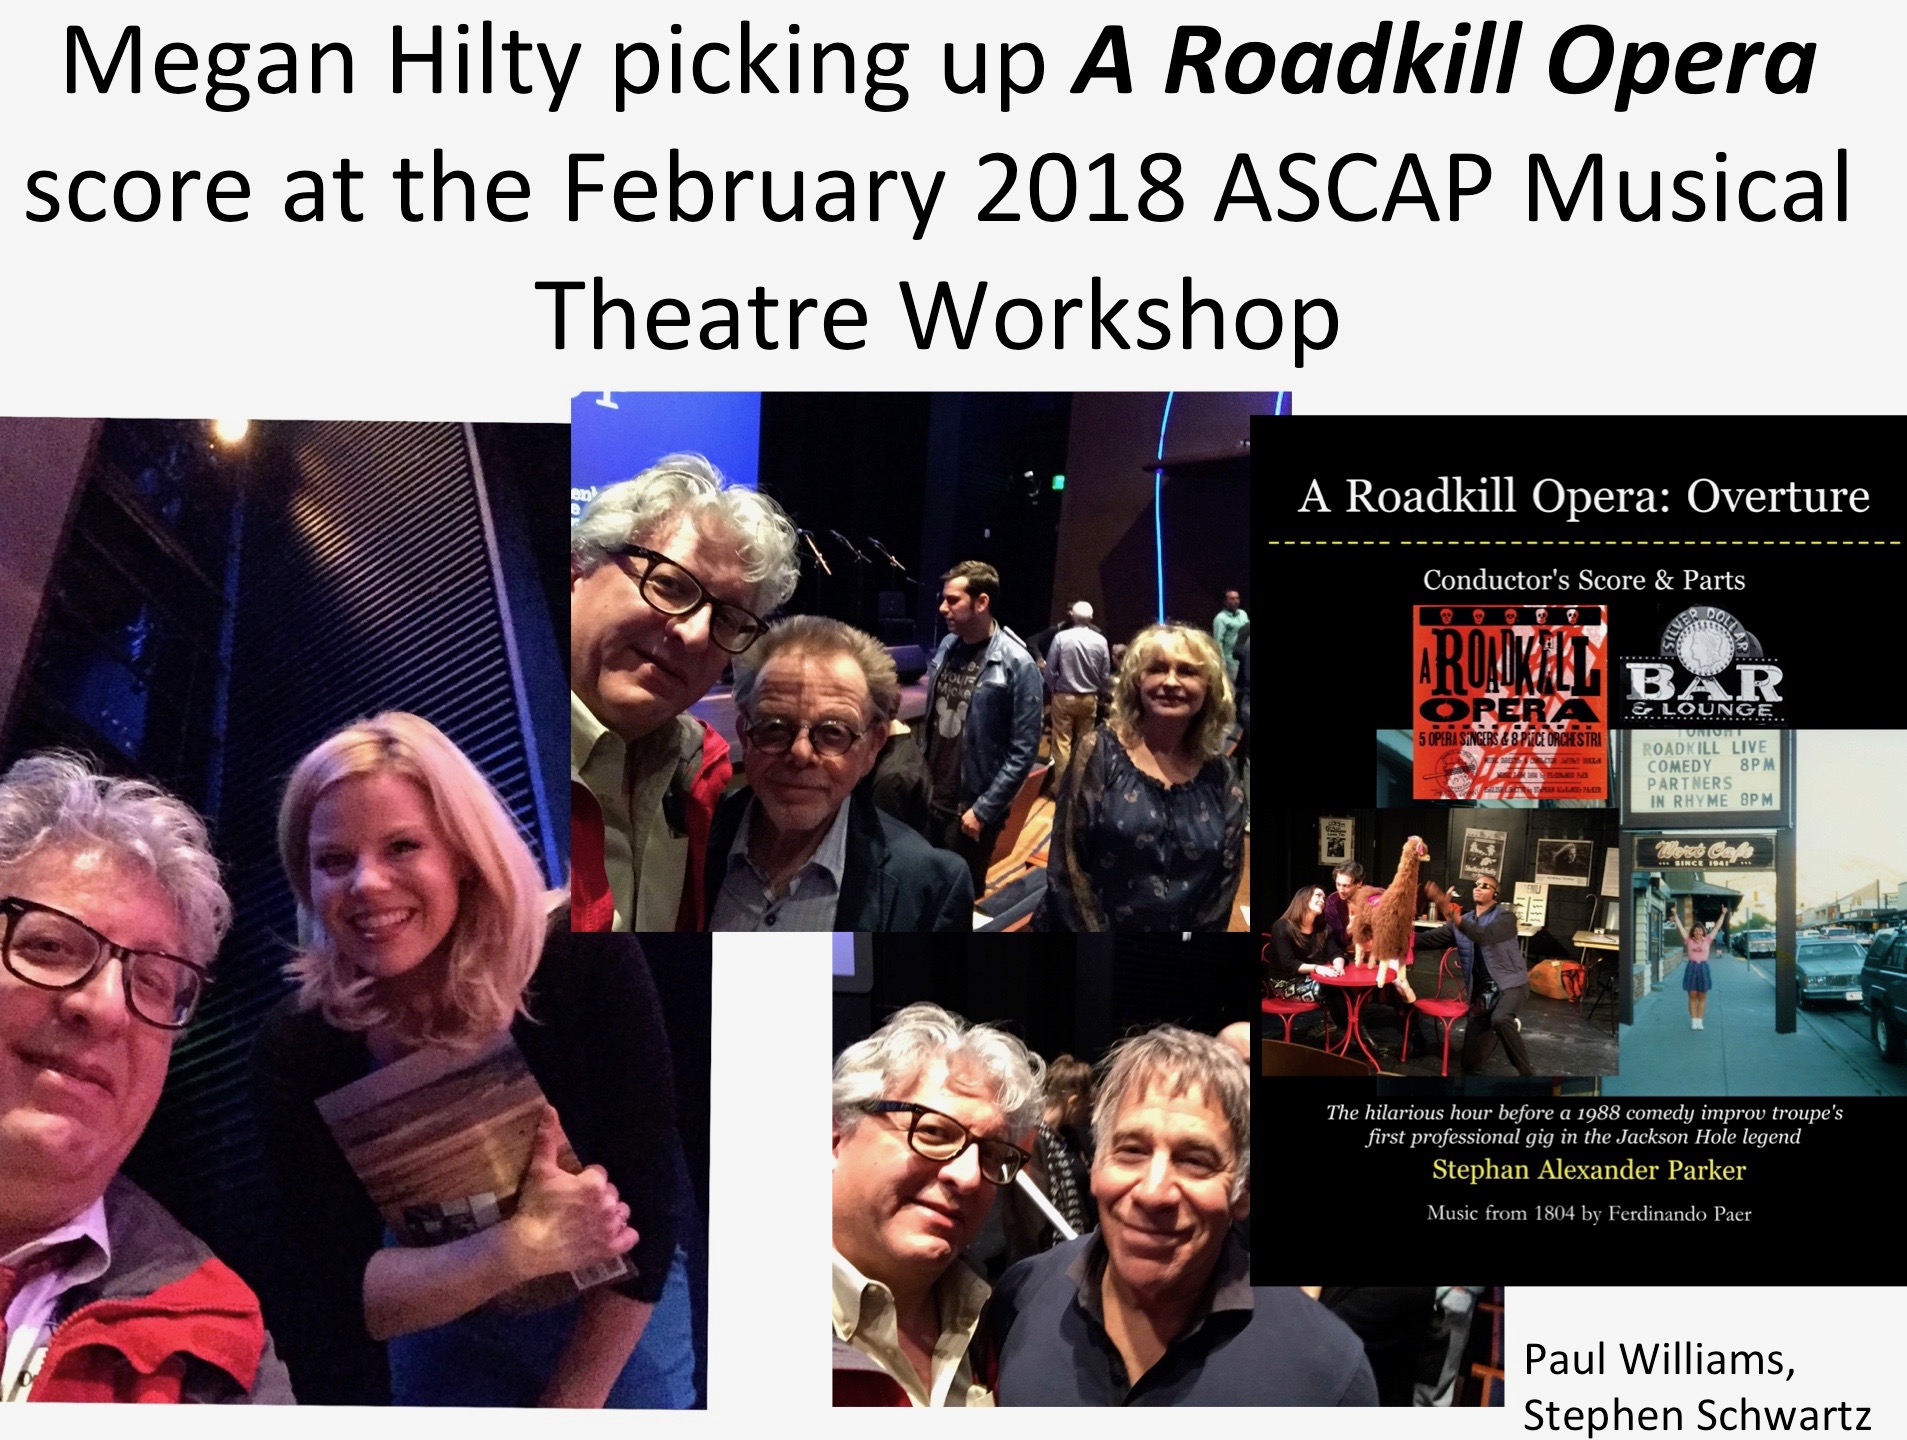 Photos at the February 2018 ASCAP Musical Theatre Workshop, from left: Hilty (holding the score) with Stephan Alexander Parker; Parker meeting Paul and Mariana Williams (ASCAP Chairman and President of the Board Paul Williams, lyricist for "The Rainbow Connection", "Rainy Days and Mondays, "Evergreen""and other classics, when given a set of promotional chopsticks as seen in the video promo Parker and Dokken made at the GRAMMYs in February 2015, asked "What is A Roadkill Opera?"); Parker with workshop leader Stephen Schwartz, famous for Godspell, Pippin, and Wicked); photo of the covert of the conductor's score and parts for A Roadkill Opera: Overture.